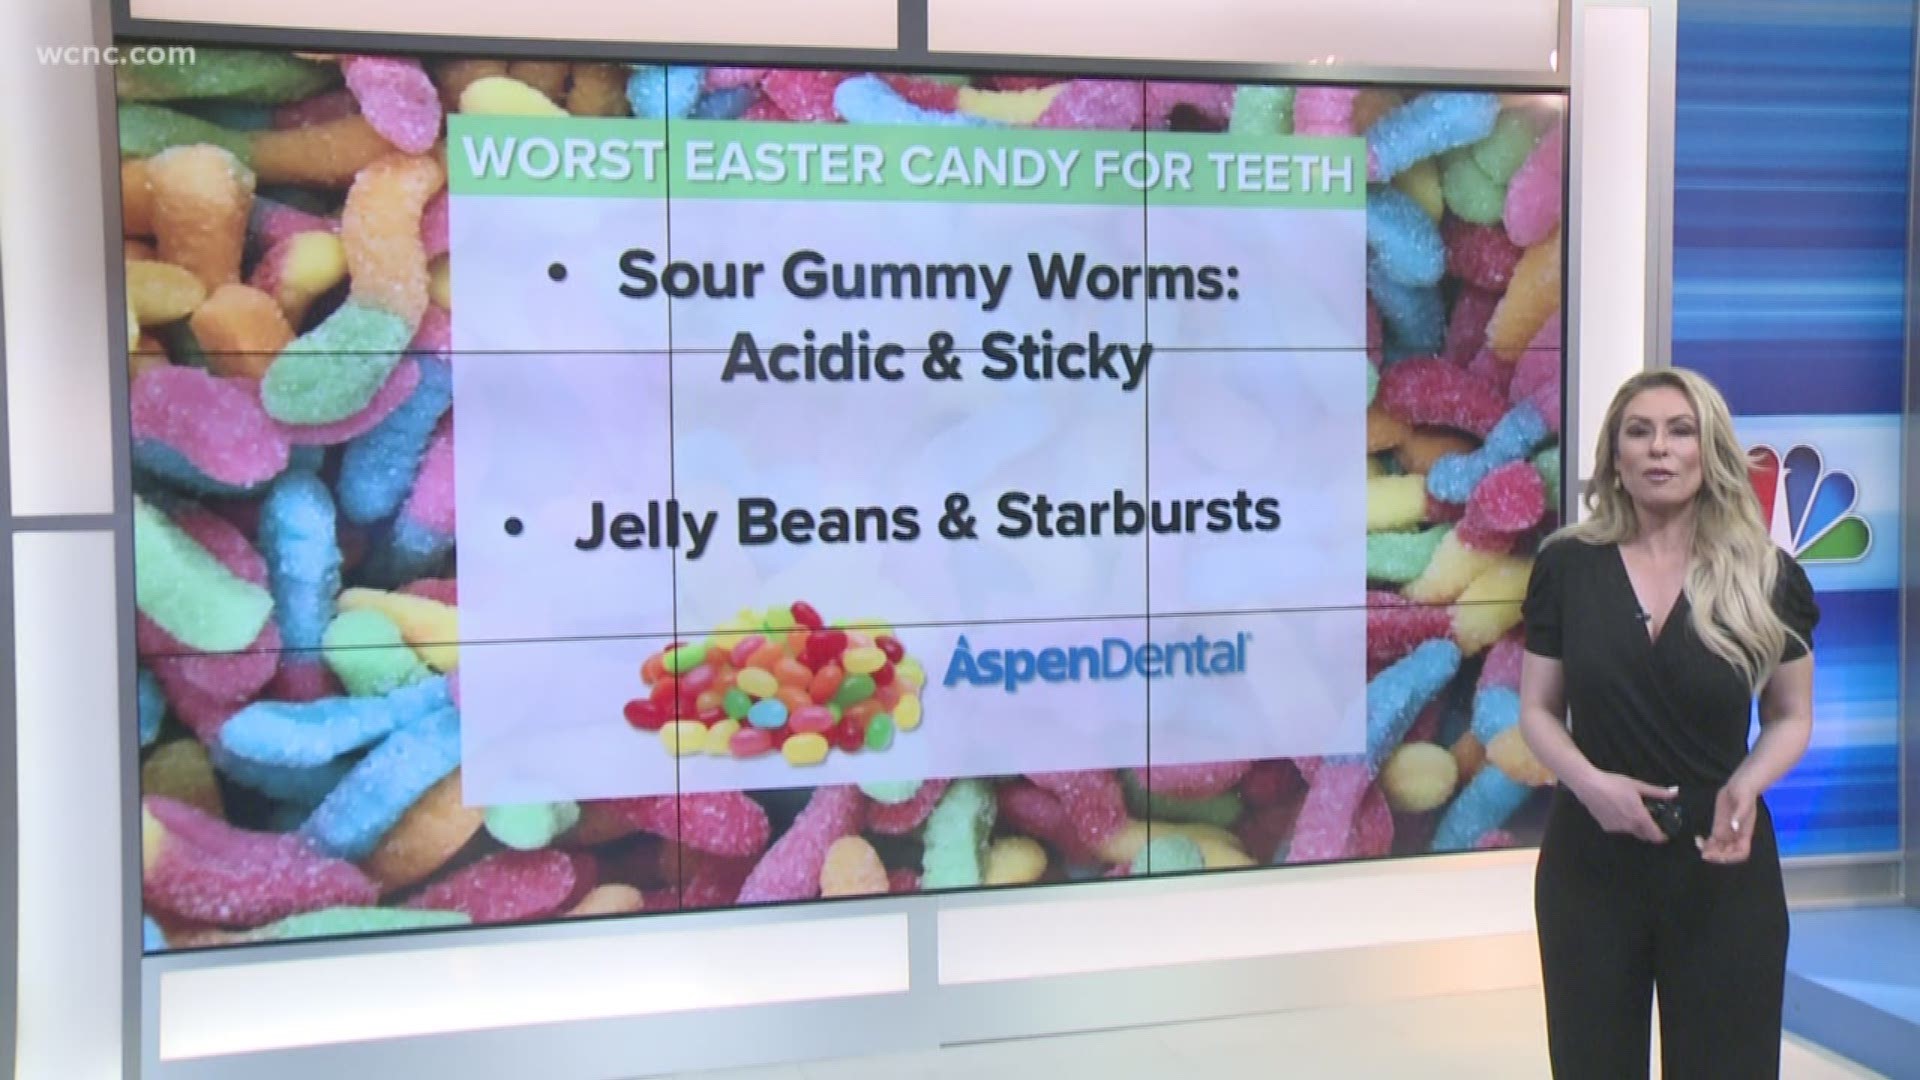 With Easter right around the corner, dentists are warning people about the worst candies for our teeth.